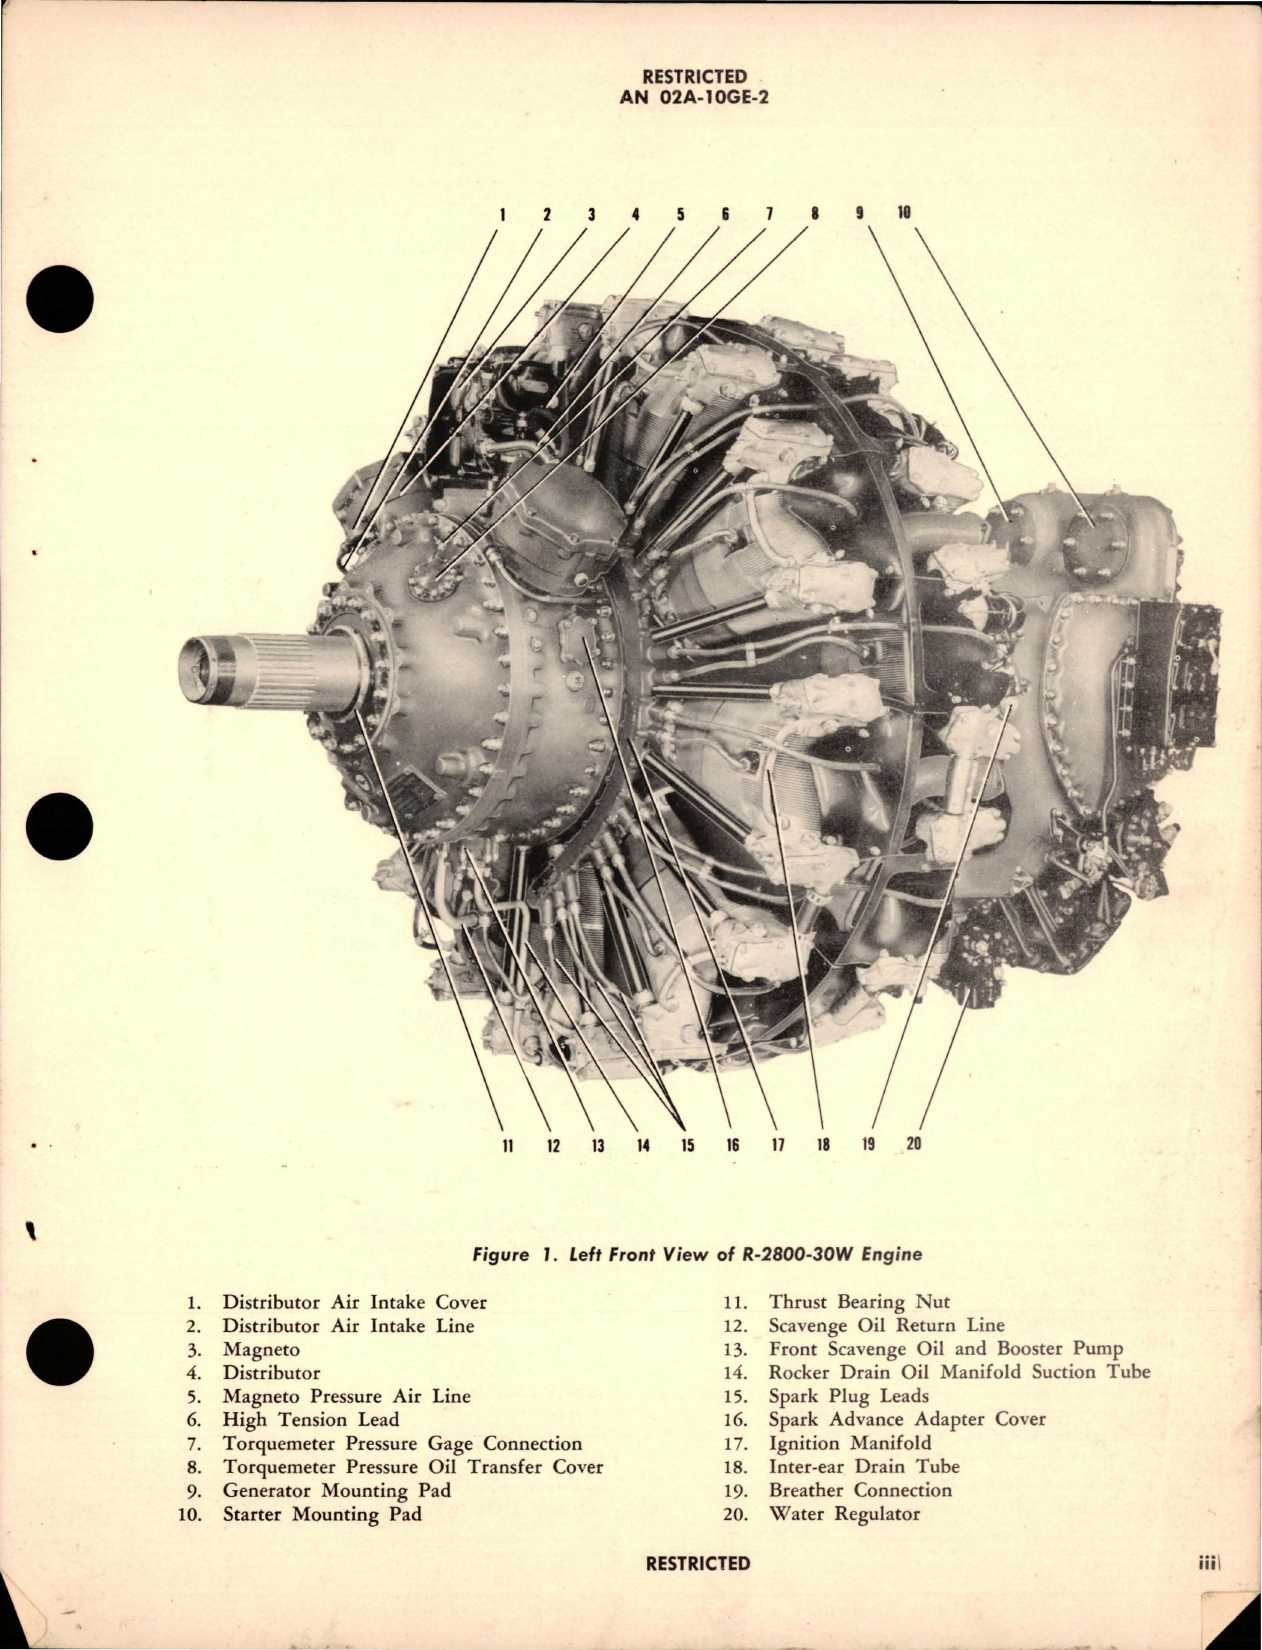 Sample page 5 from AirCorps Library document: Service Instructions for Aircraft Engines - Models R-2800-30W and R-2800-32W